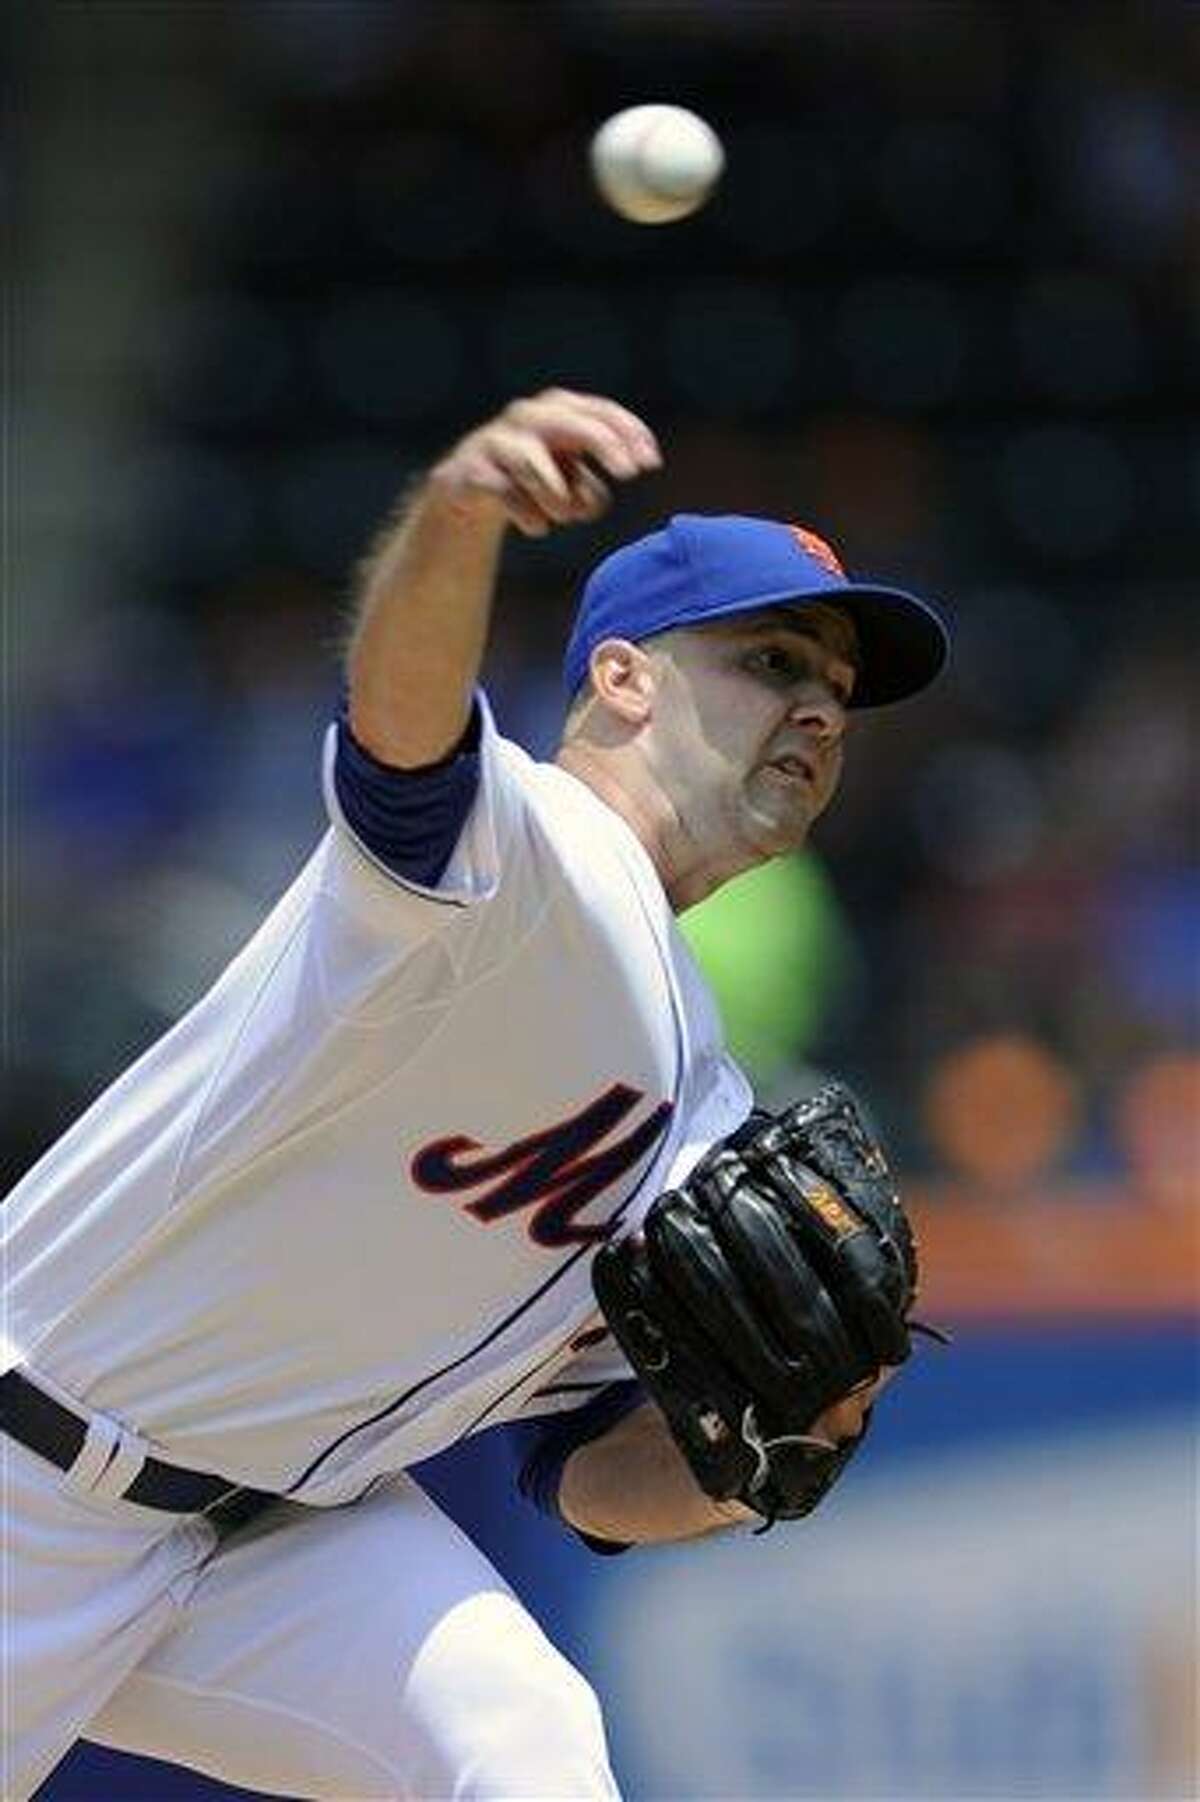 New York Mets pitcher Dillon Gee delivers the ball to the Washington Nationals during the first inning of a baseball game Saturday, June 29, 2013, in New York. (AP Photo/Bill Kostroun)